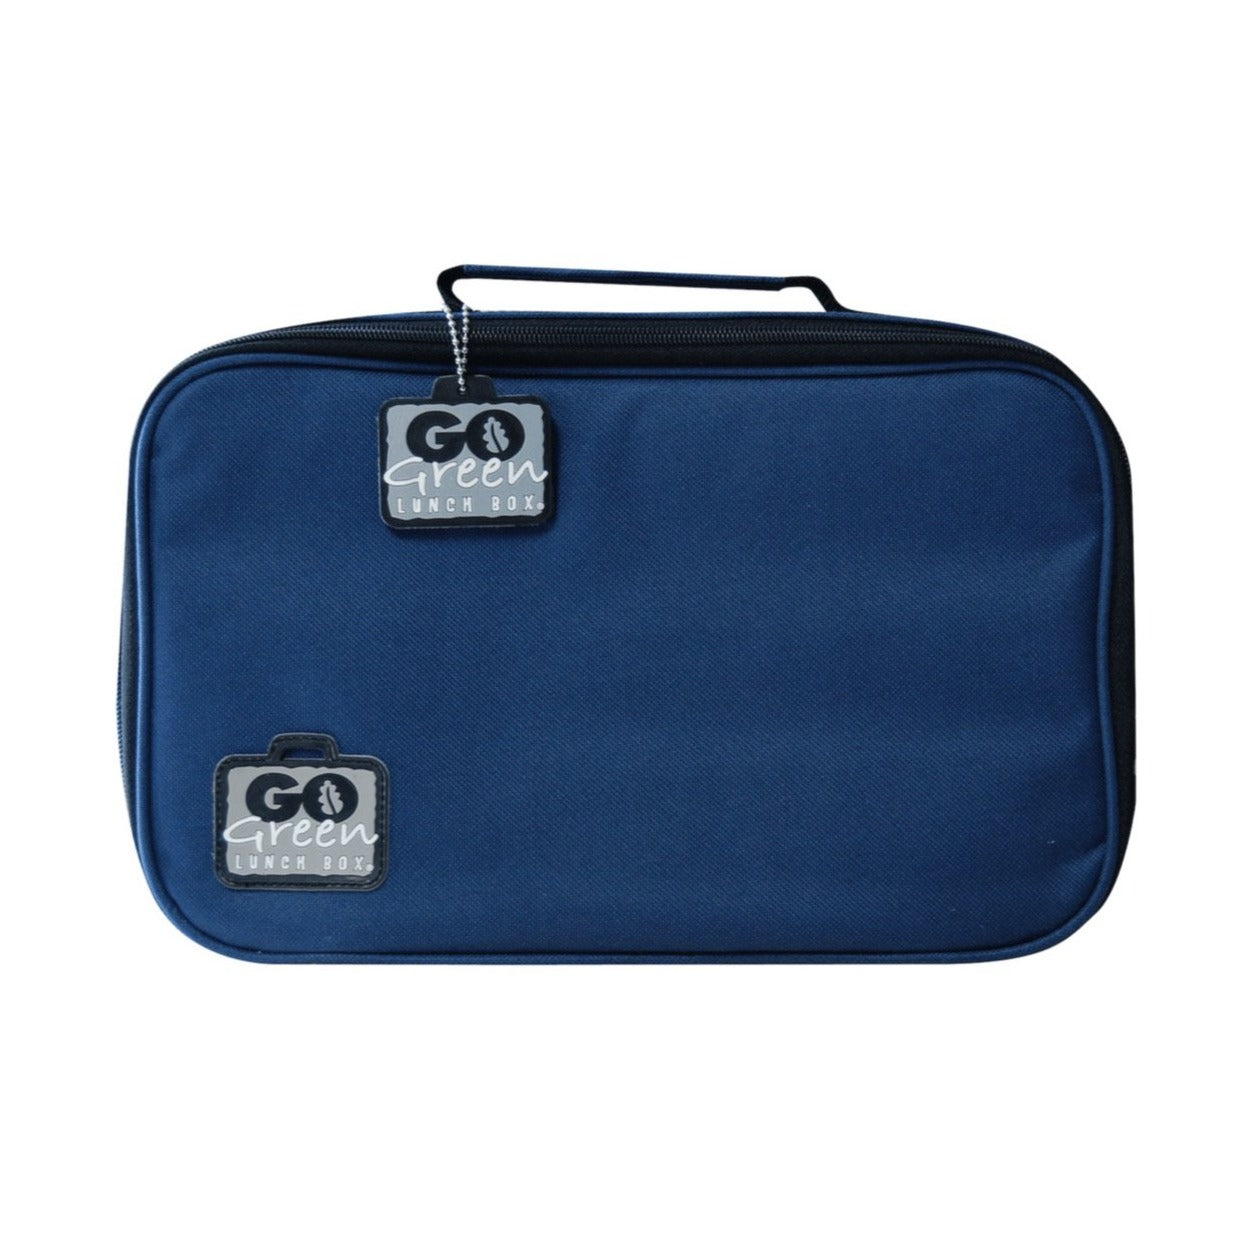 Go Green Insulated Carrying Case: Blue Bomber